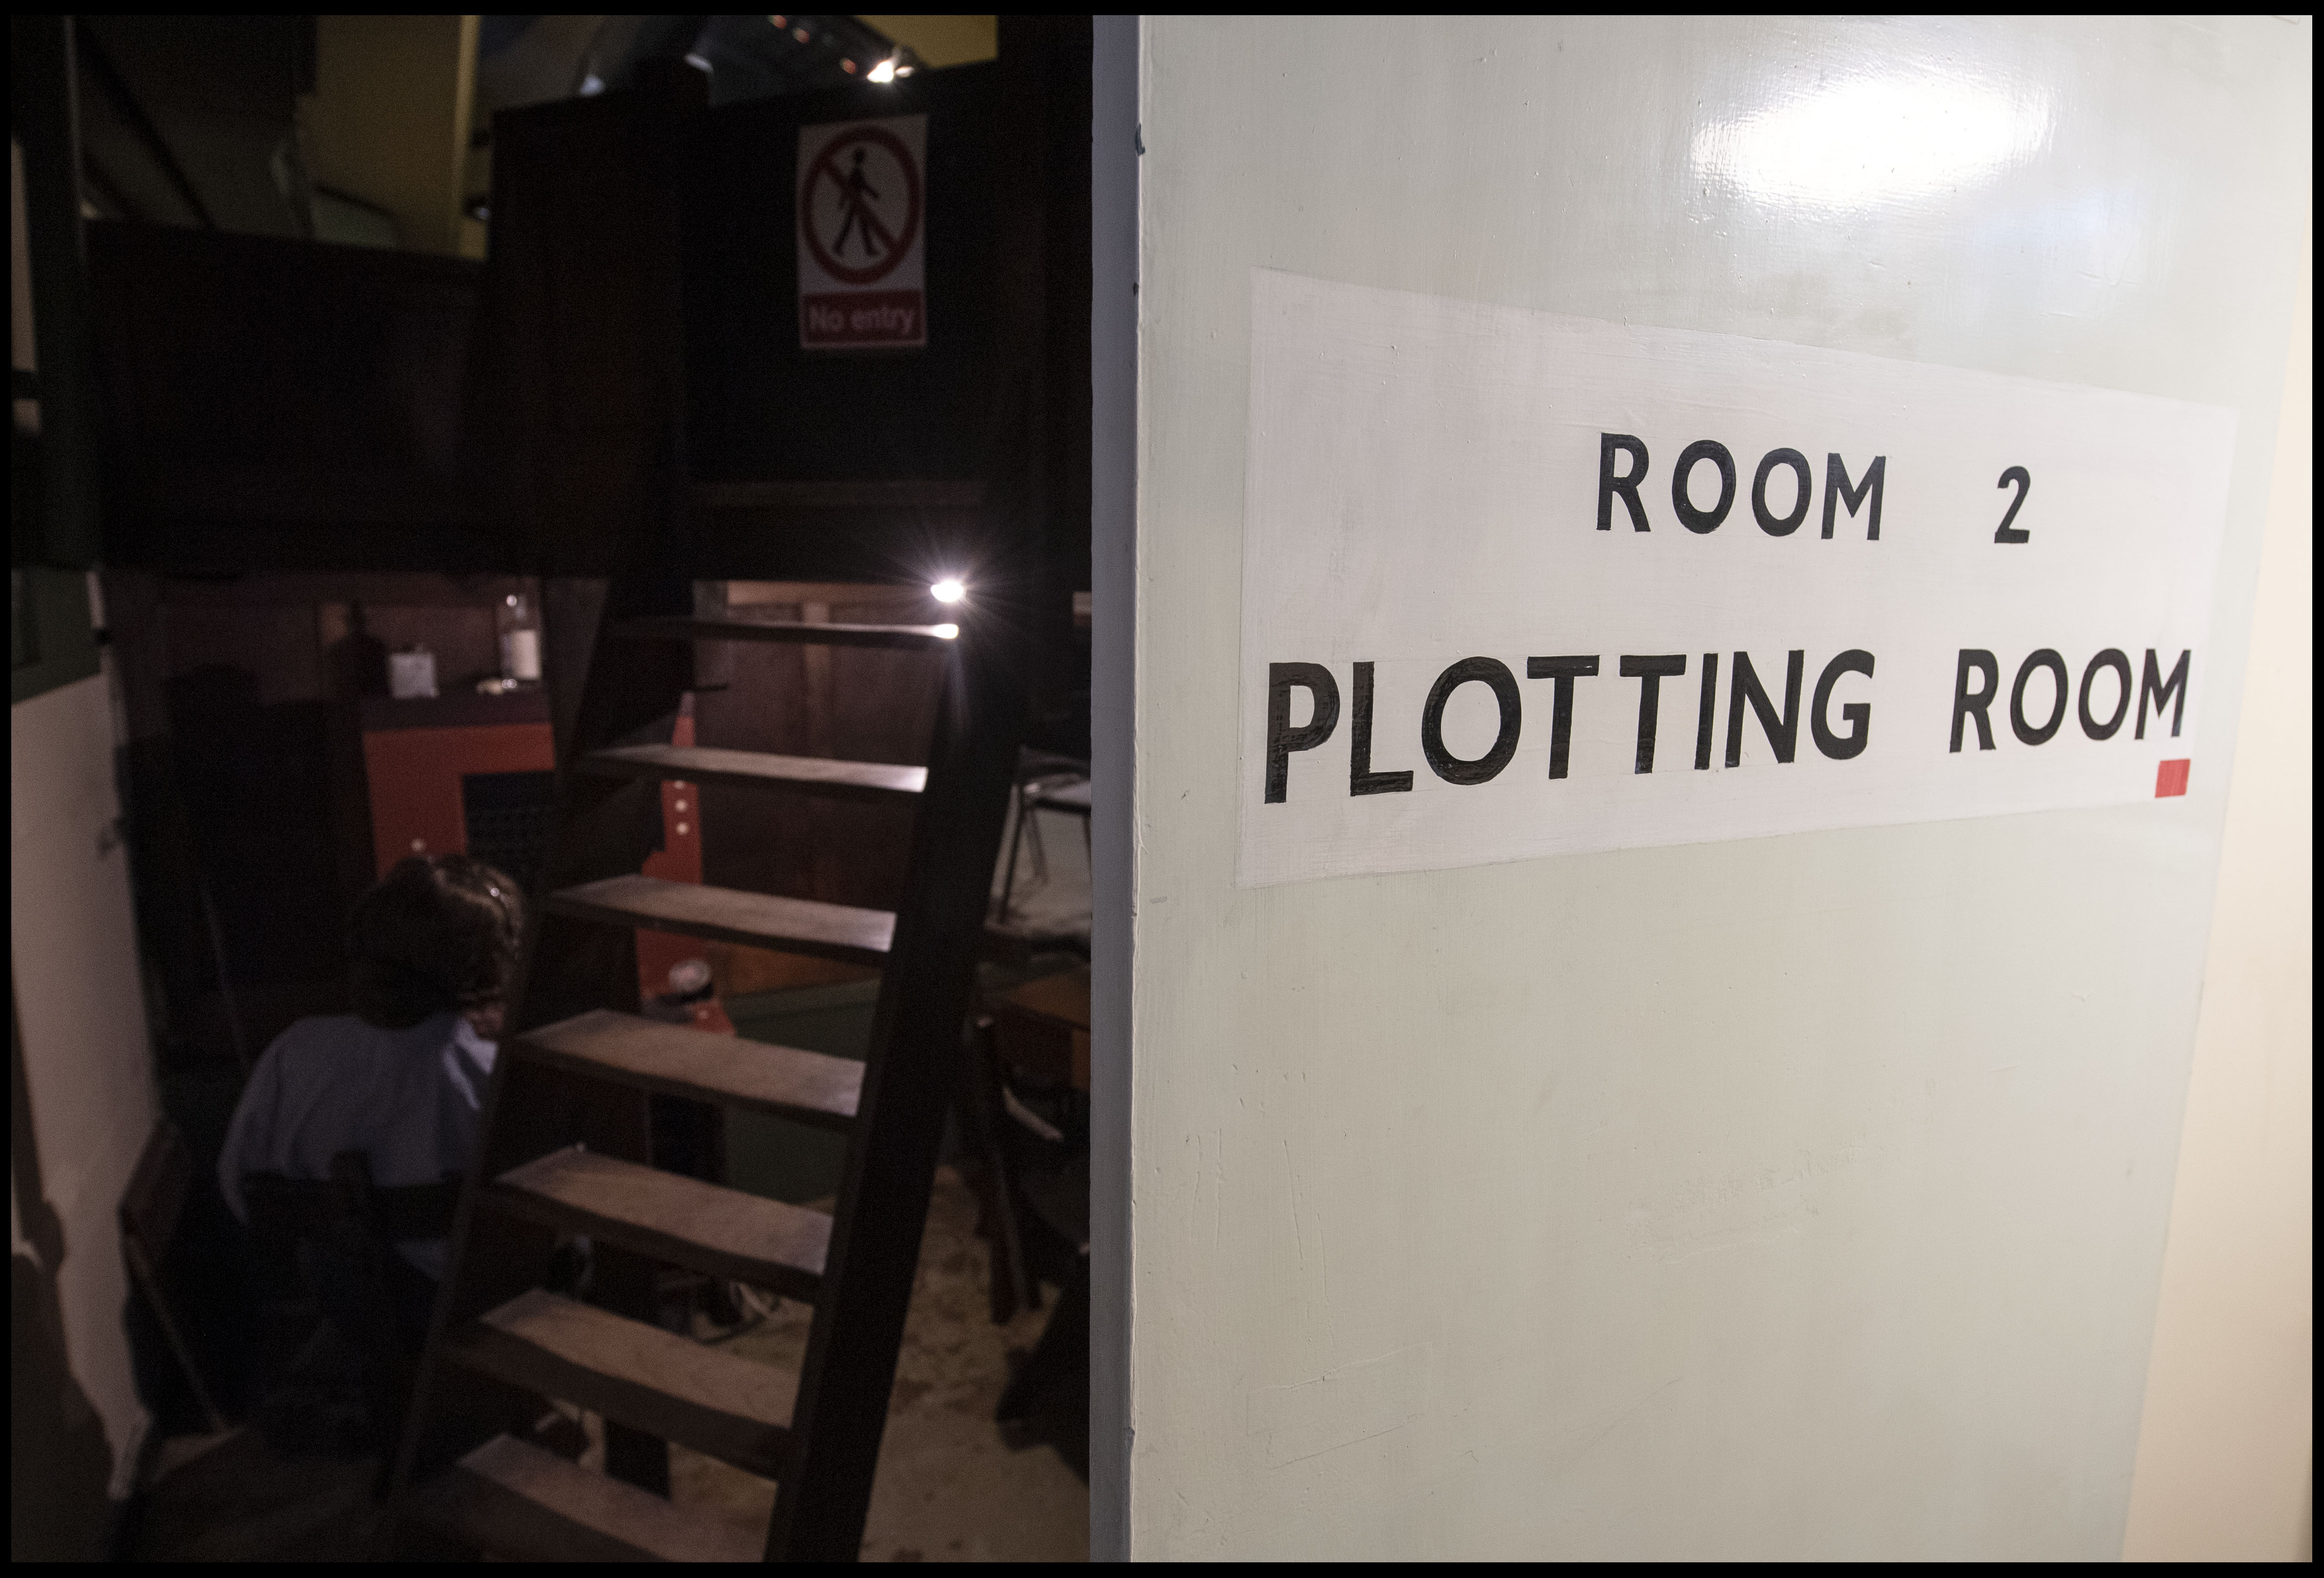 Entrance to the Plotting Room (Operations Room)